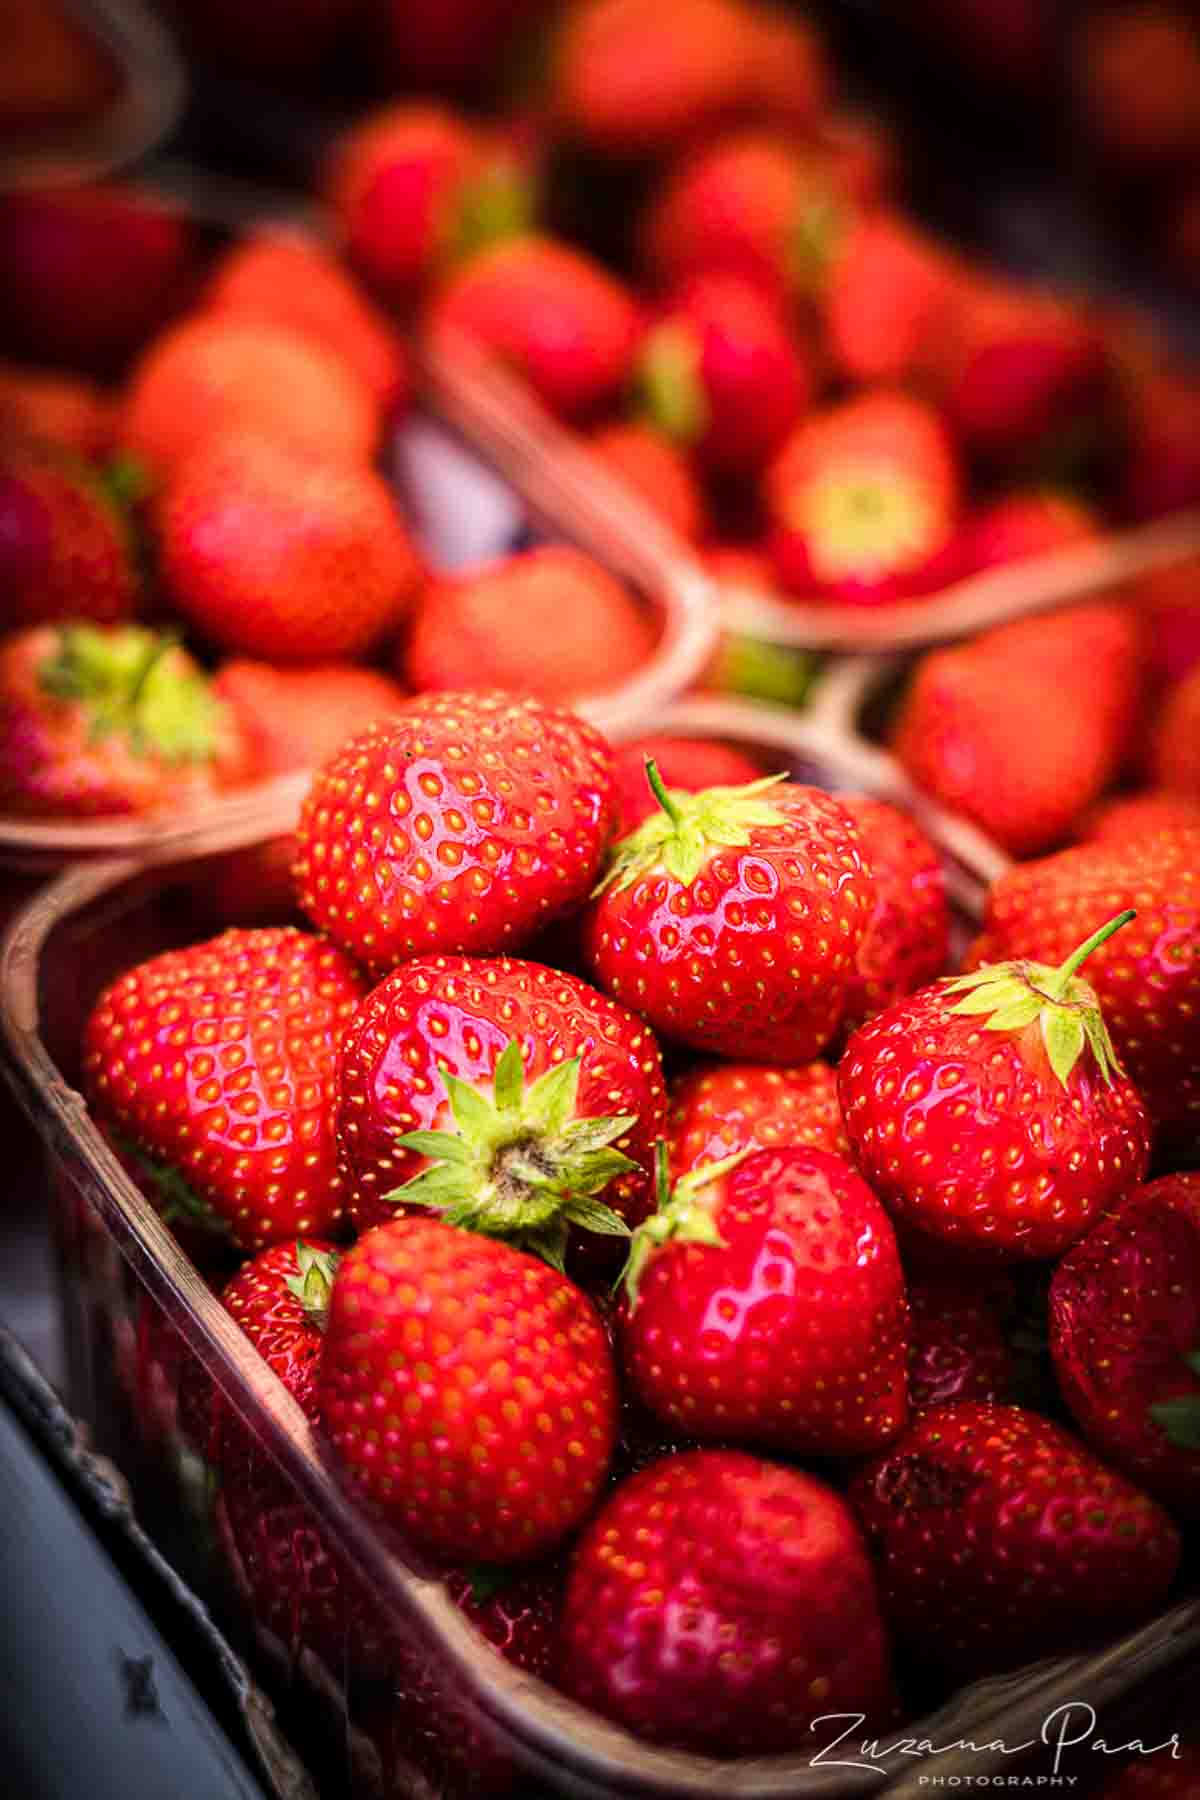 Strawberries in the market.